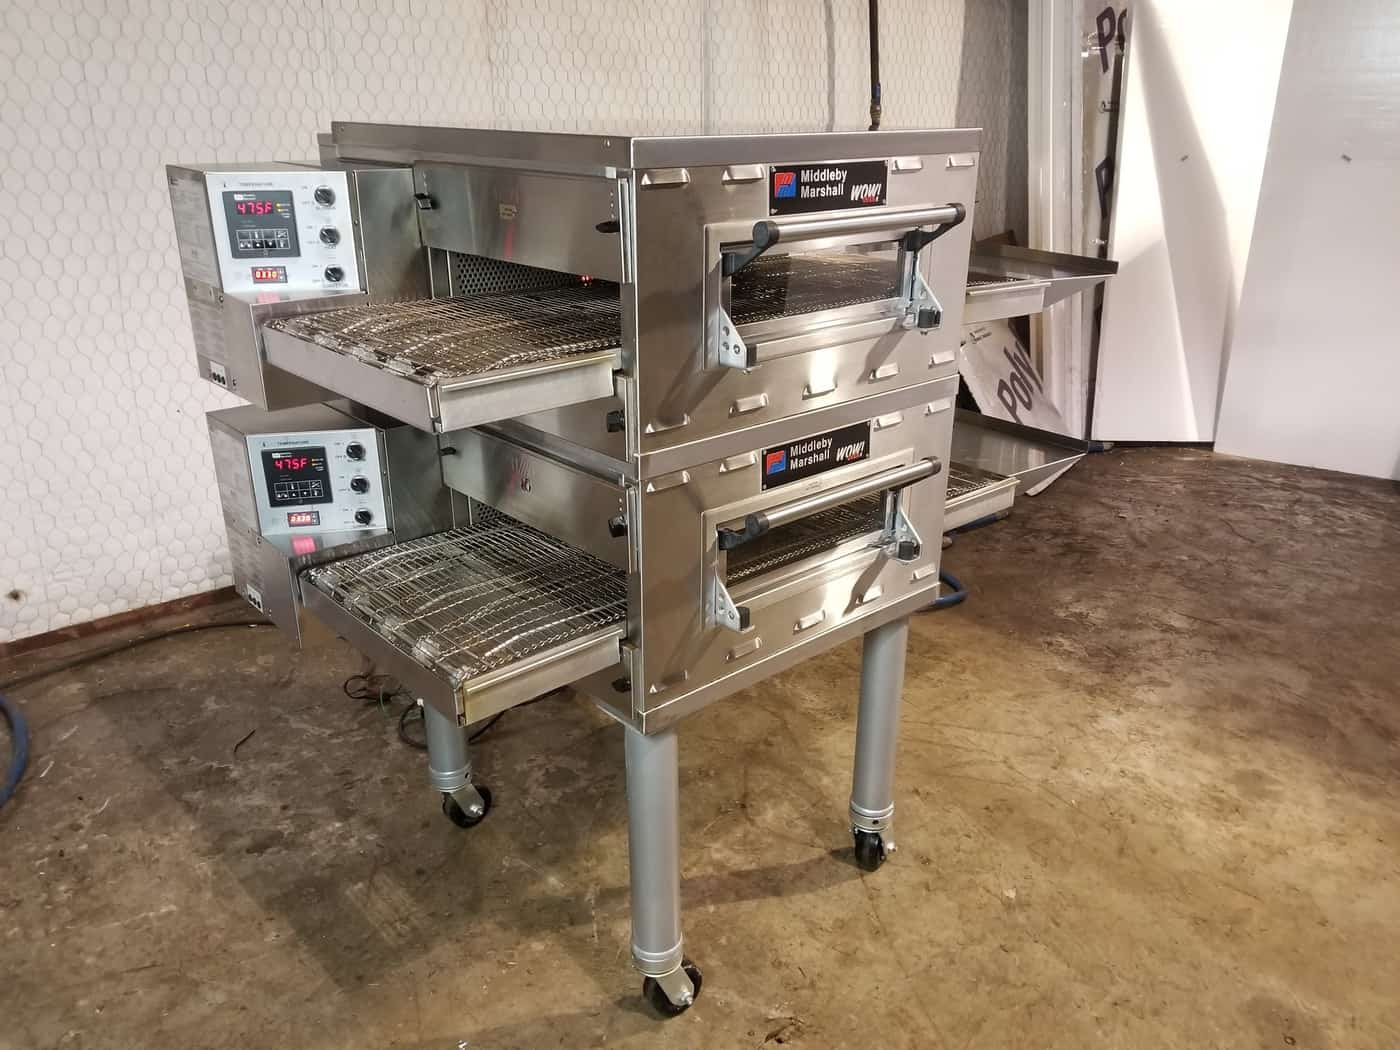 Middleby Marshall PS629g Wow Pizza Conveyor Ovens